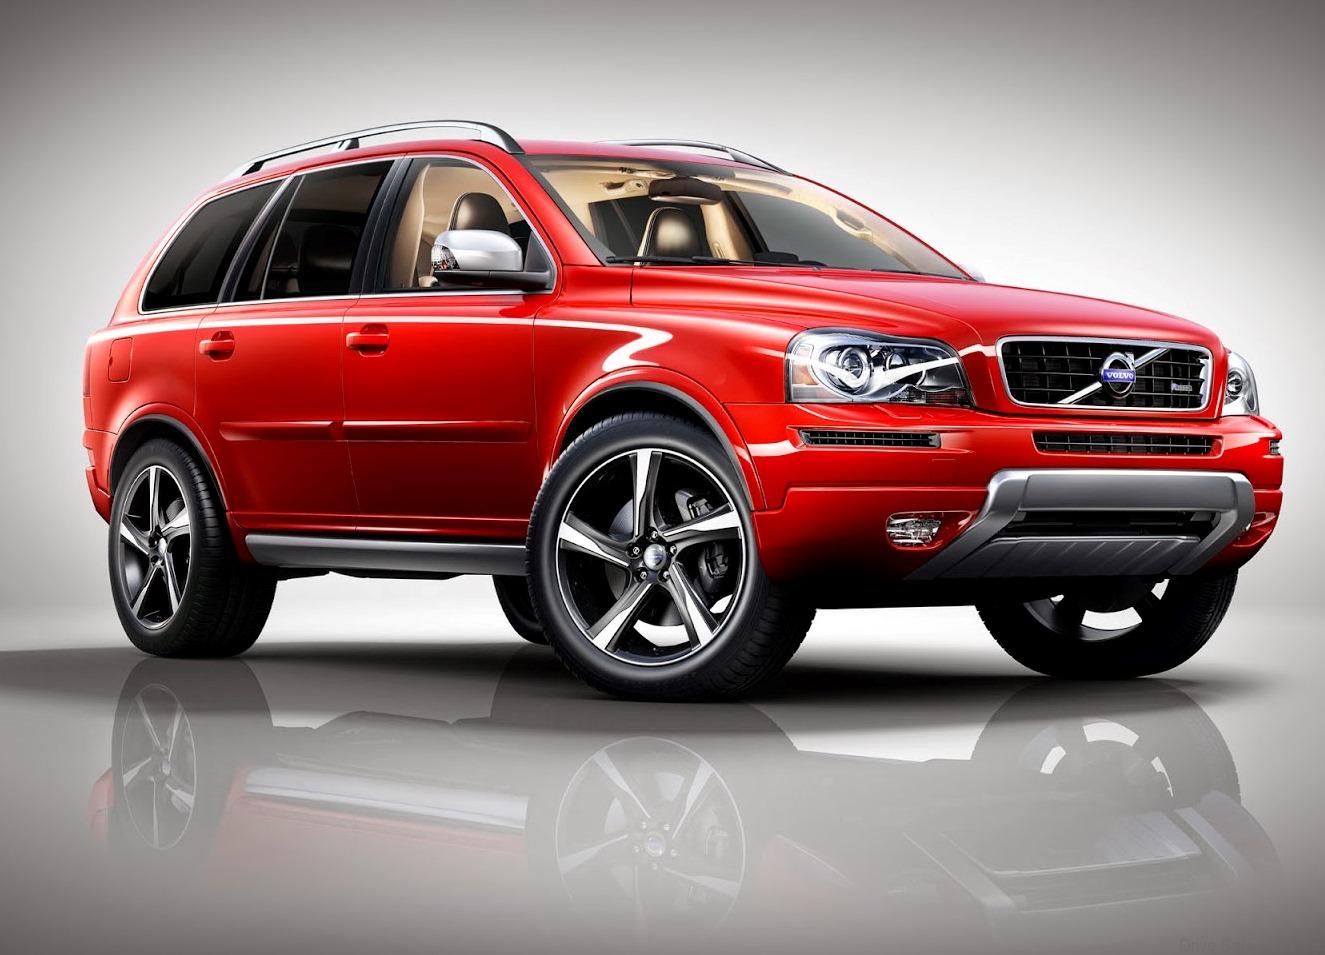 Volvo XC90 SUV, Used Car Review